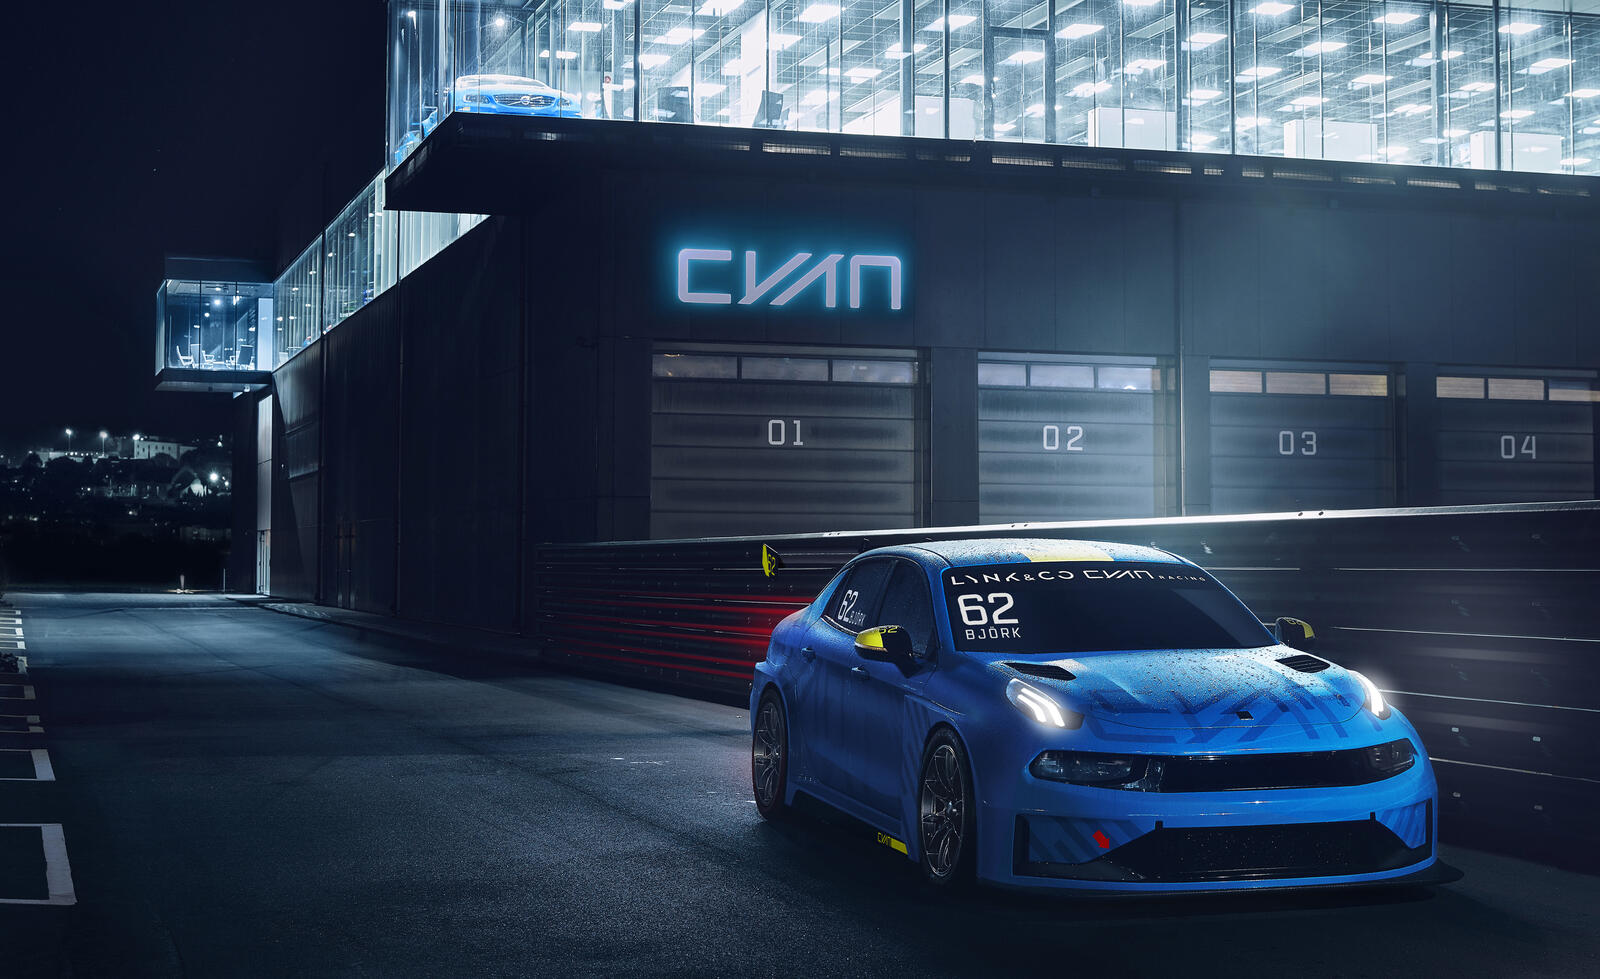 Wallpapers Lynk And Co 2019 cars automobiles on the desktop